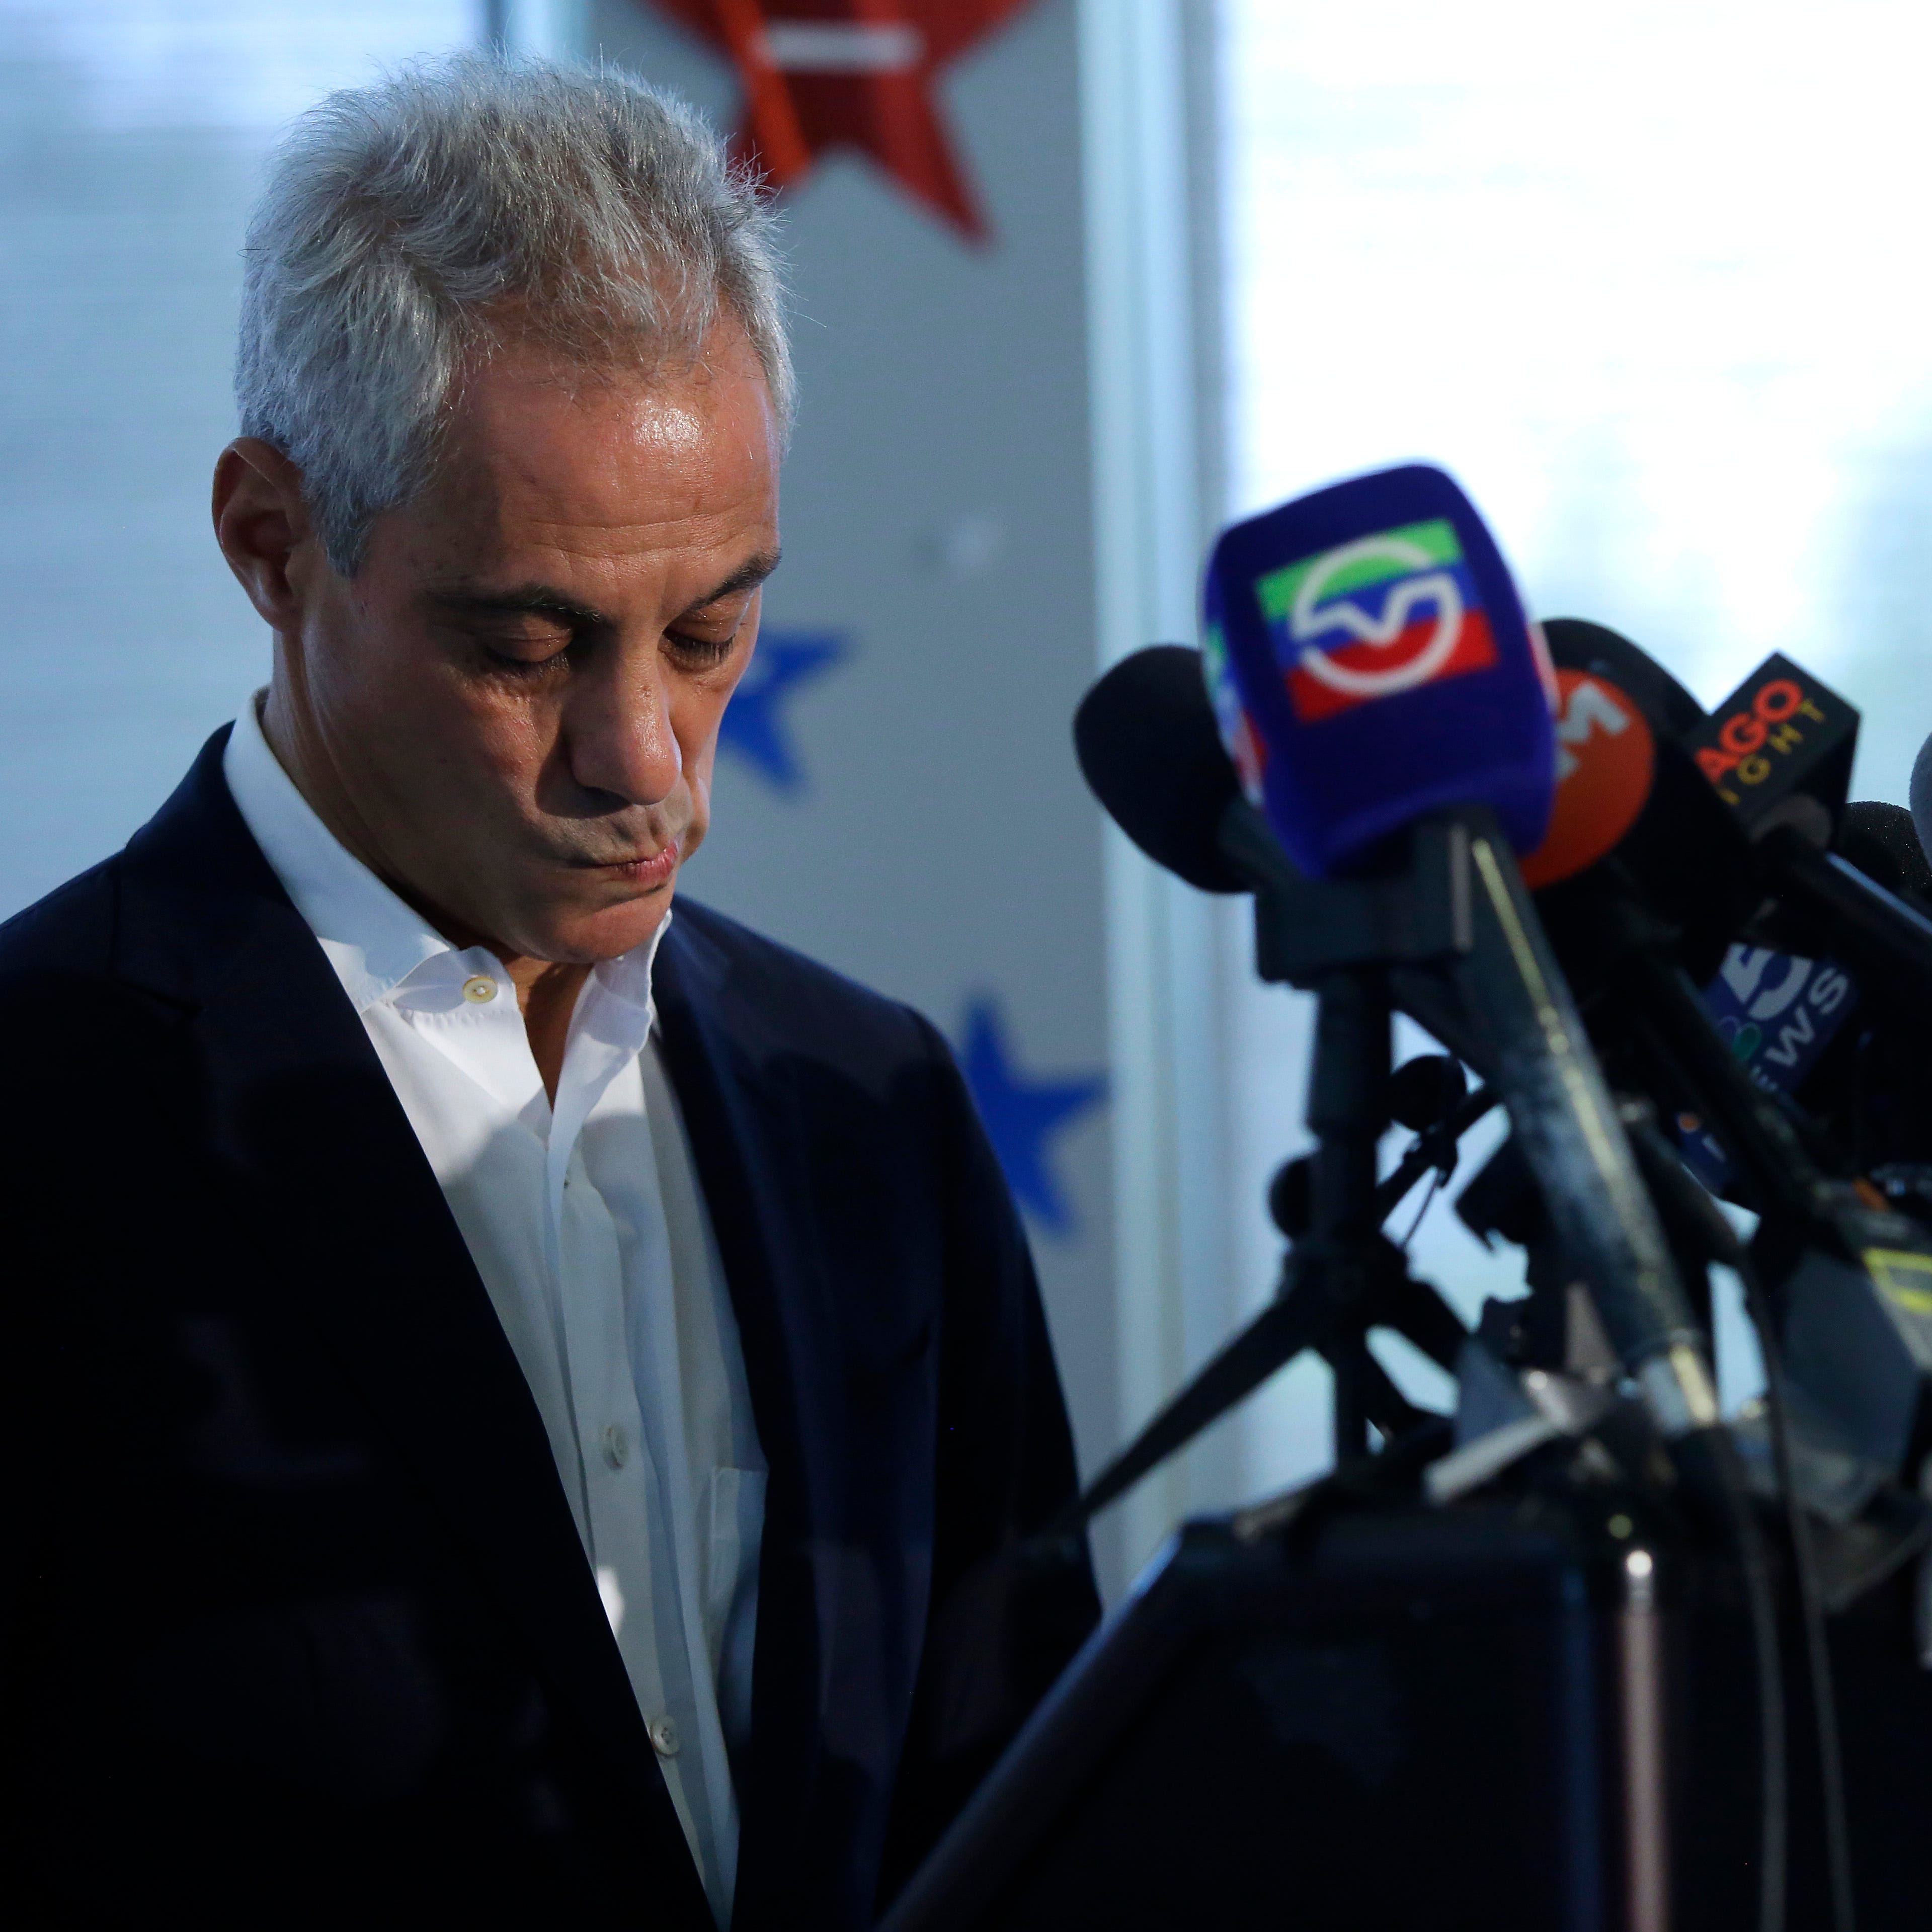 Chicago Mayor Rahm Emanuel pauses after speaking about Chicago's weekend of gun violence during a news conference at the Chicago Police Department 6th District station, Monday, Aug. 6, 2018 in Chicago, IL. Chicago experienced one of it's most violent